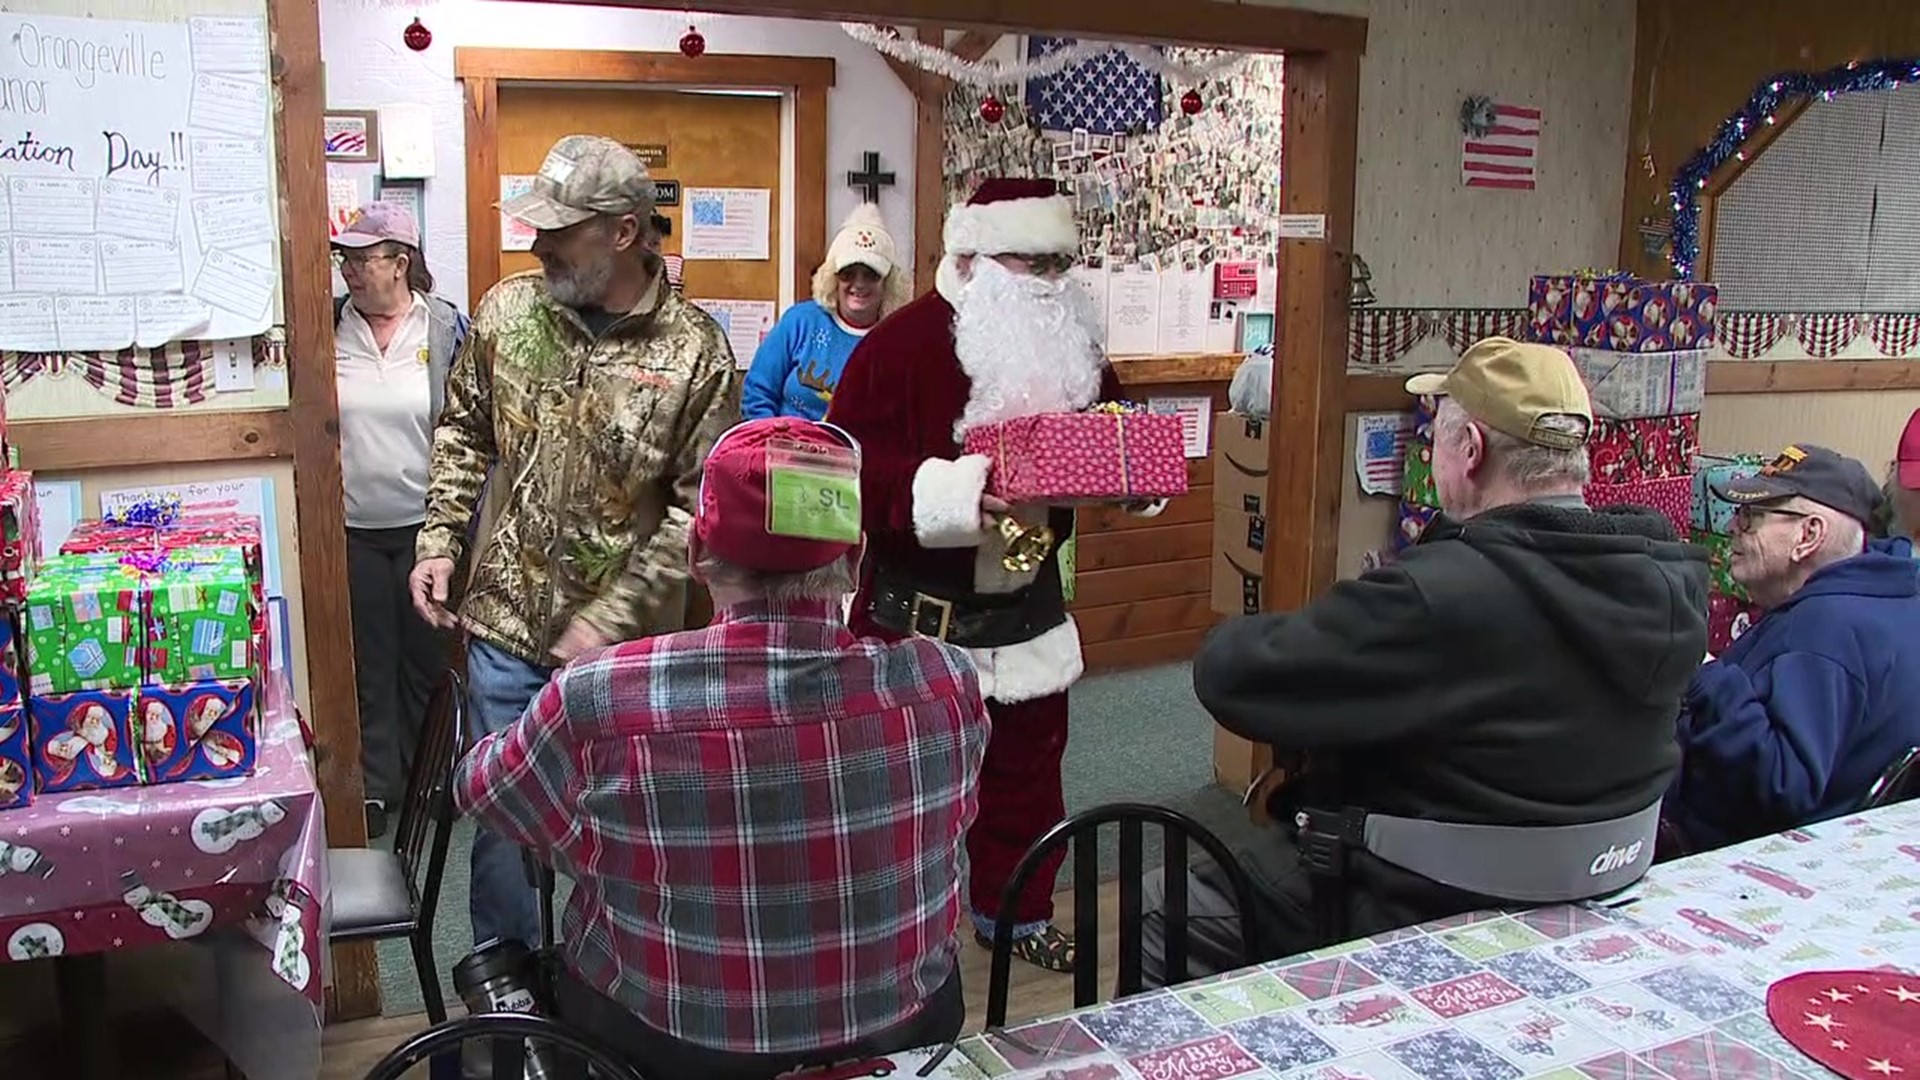 Newswatch 16's Nikki Krize shows us how area groups made sure the heroes will have a happy holiday.